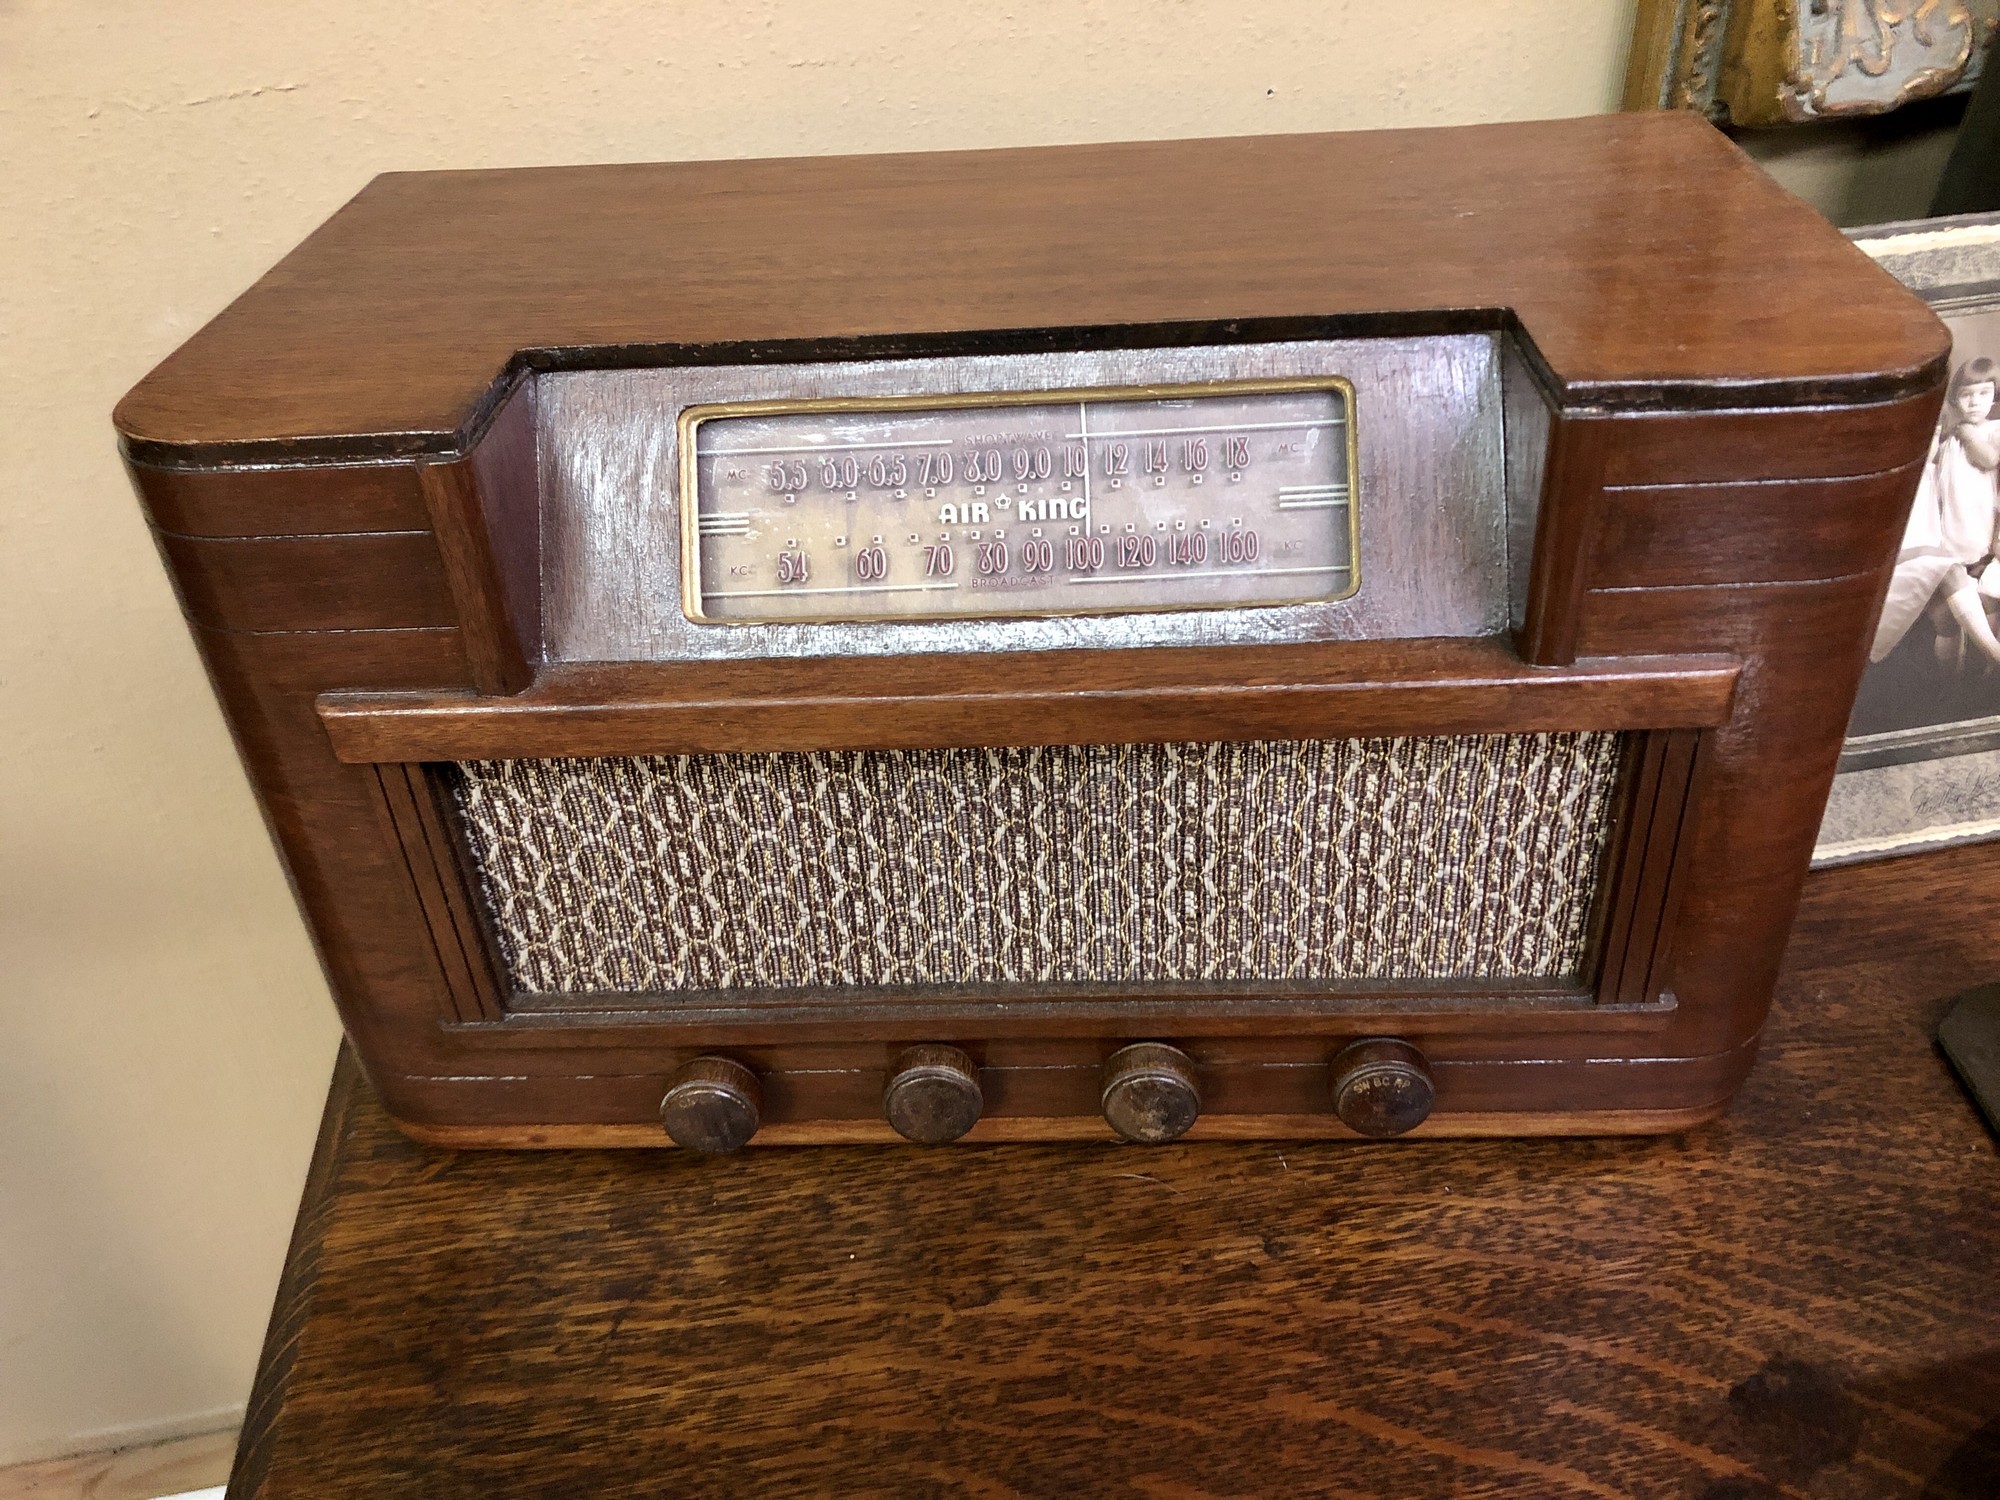 Vintage Air King 6-Tube AM Radio c. 1948. All new tubes and works great.
Instore pickup or shipping can be arranged.